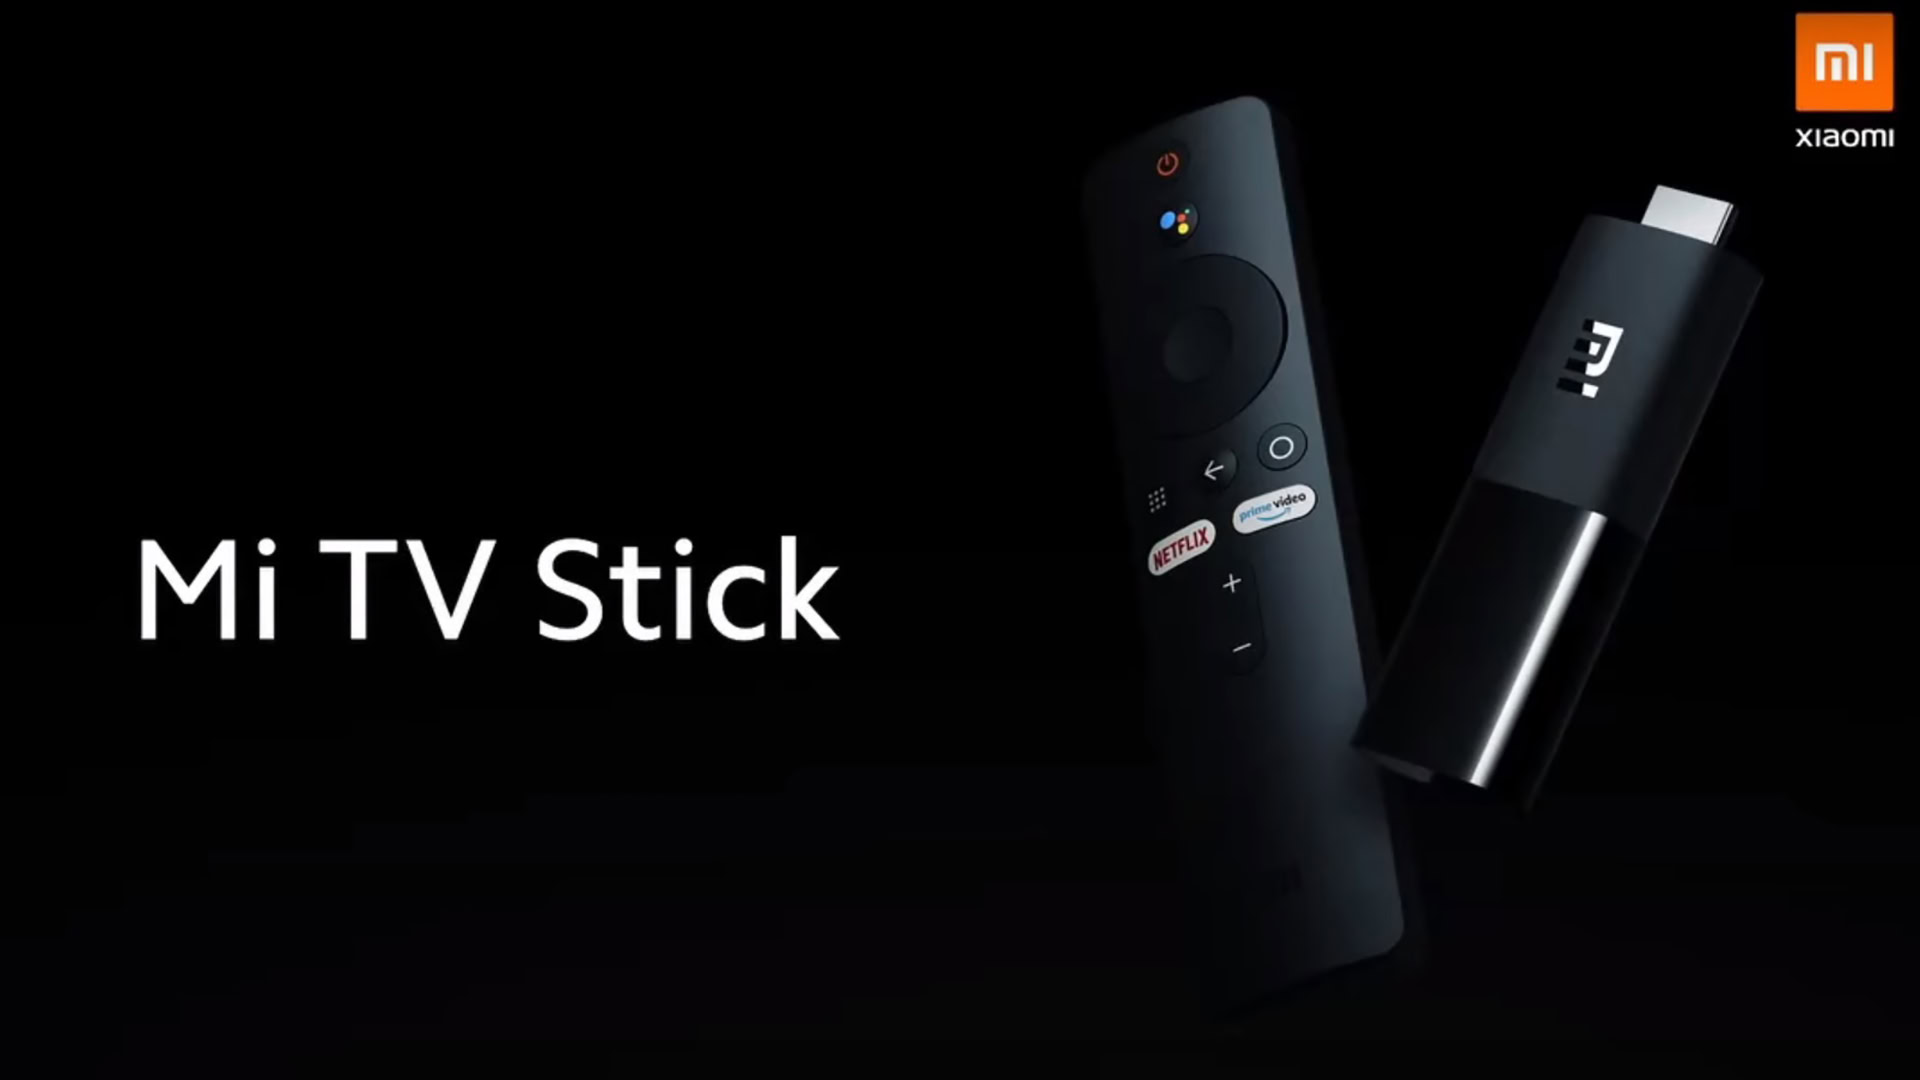 Xiaomi Mi TV Stick is real, could be powerful for a stick - Android  Authority